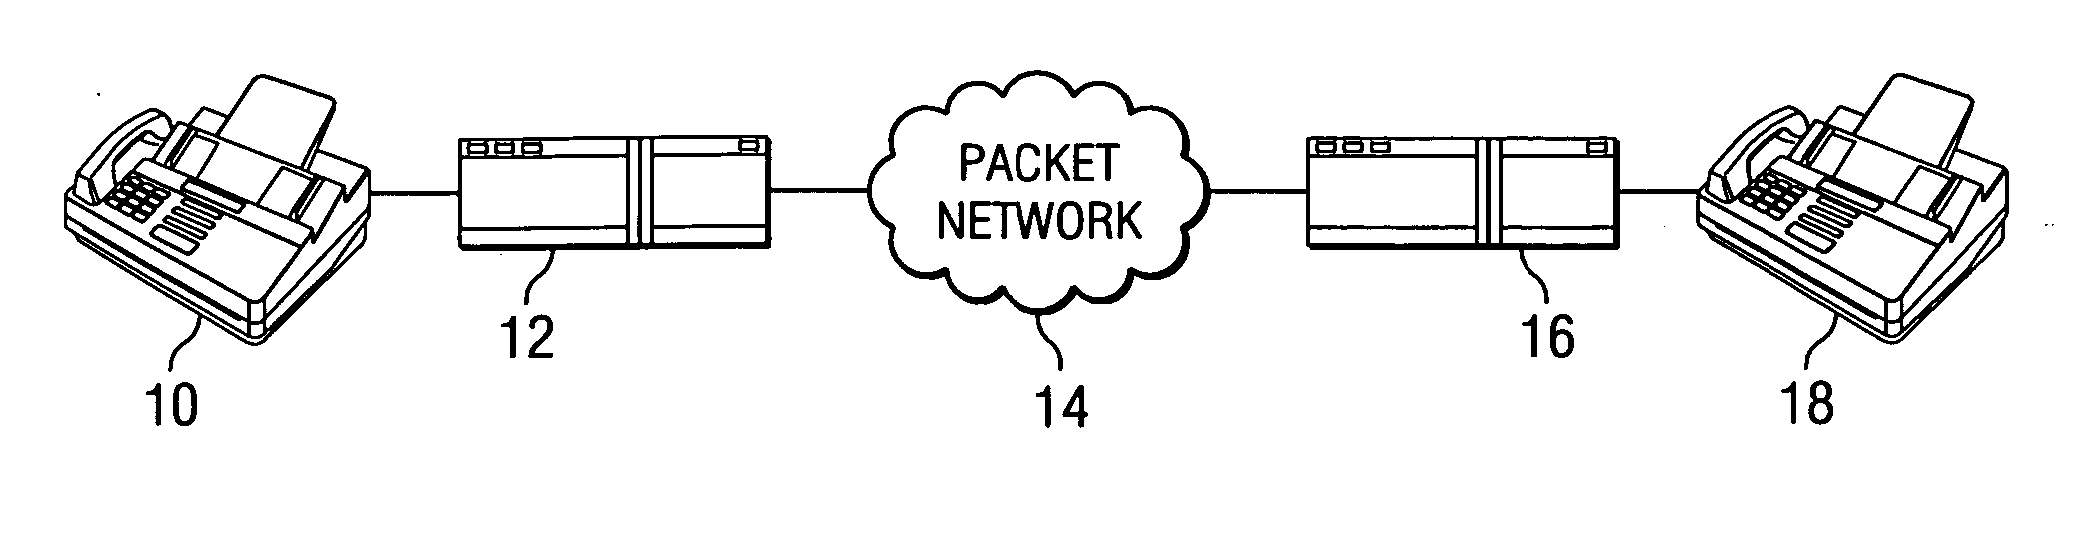 Forcing V.34 fax terminals to fallback to legacy G3 modulations over voice over intrnet protocol networks